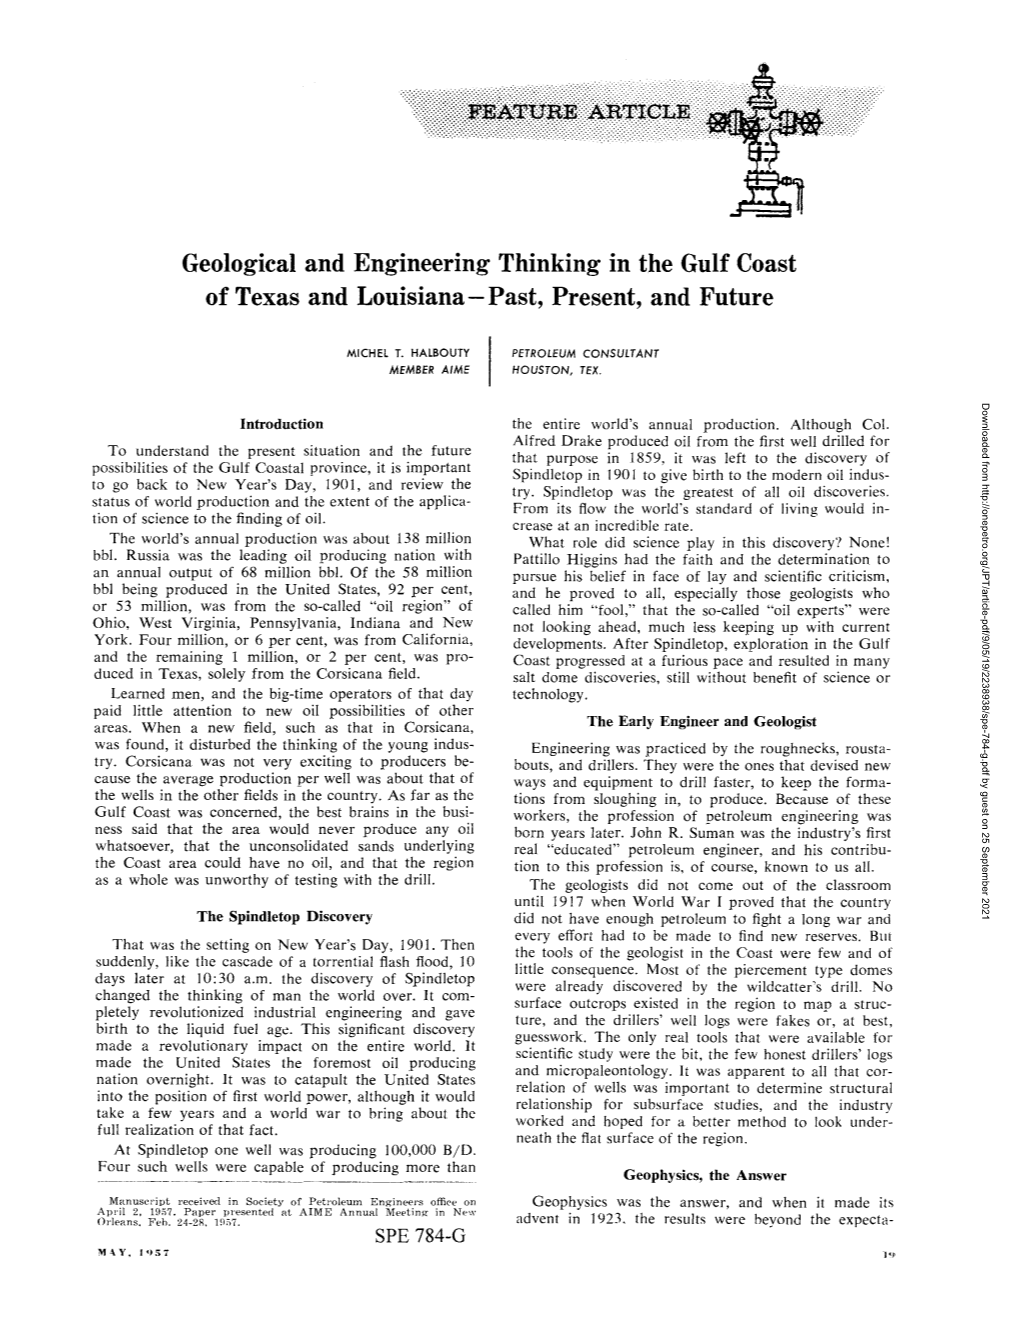 Geological and Engineering Thinking in the Gulf Coast of Texas and Louisiana - Past, Present, and Future